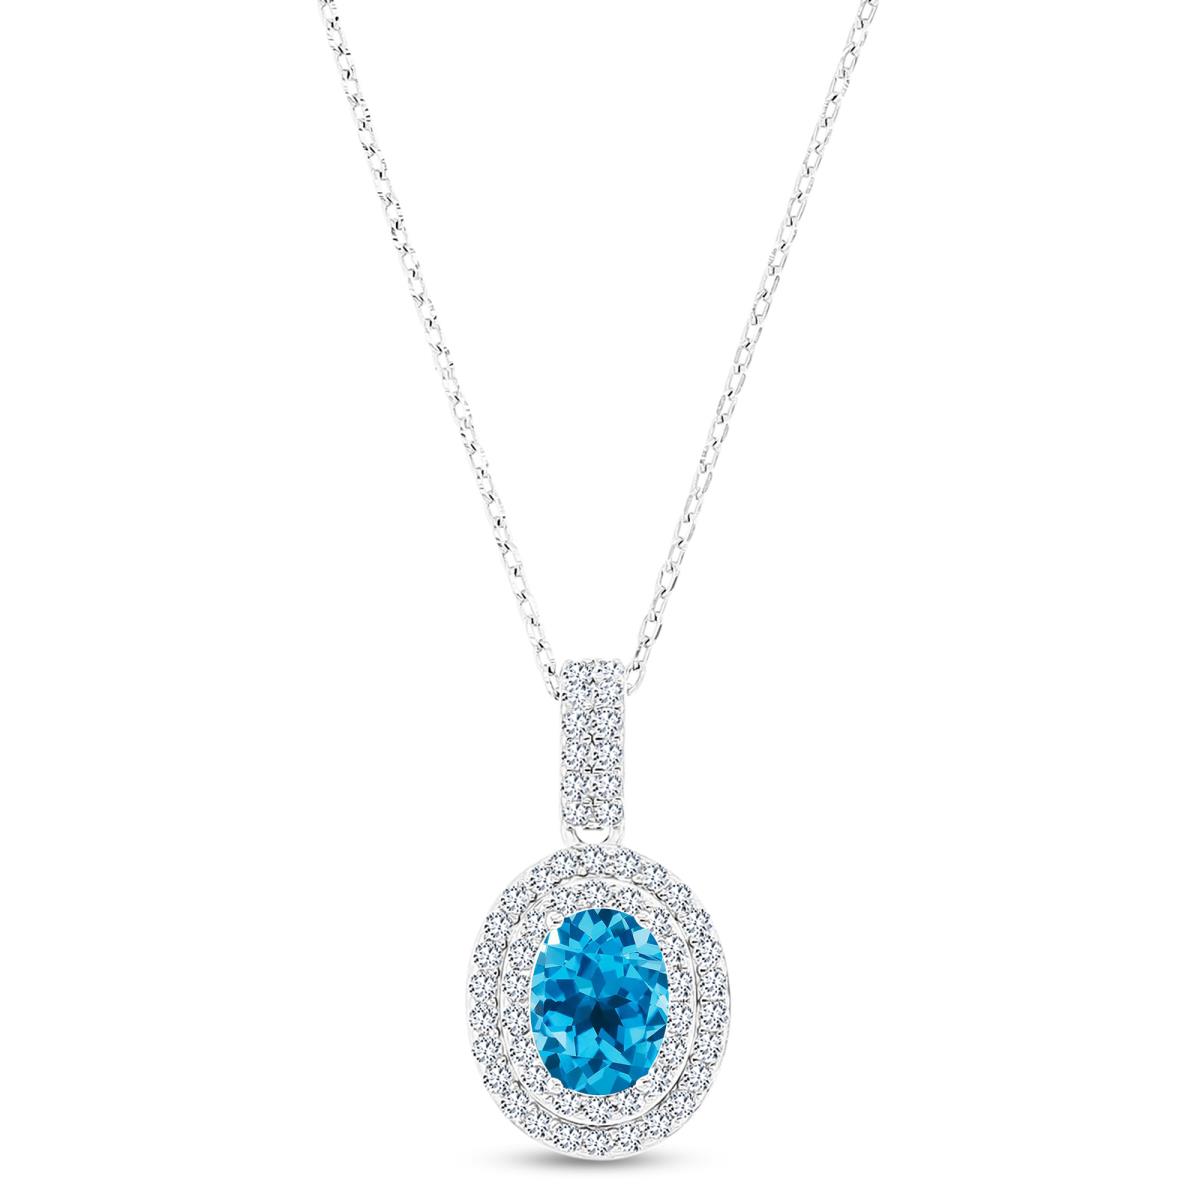 Sterling Silver Rhodium 8x6mm Oval Blue Topaz & Cr White Sapphire Halo 16"+2" Necklace